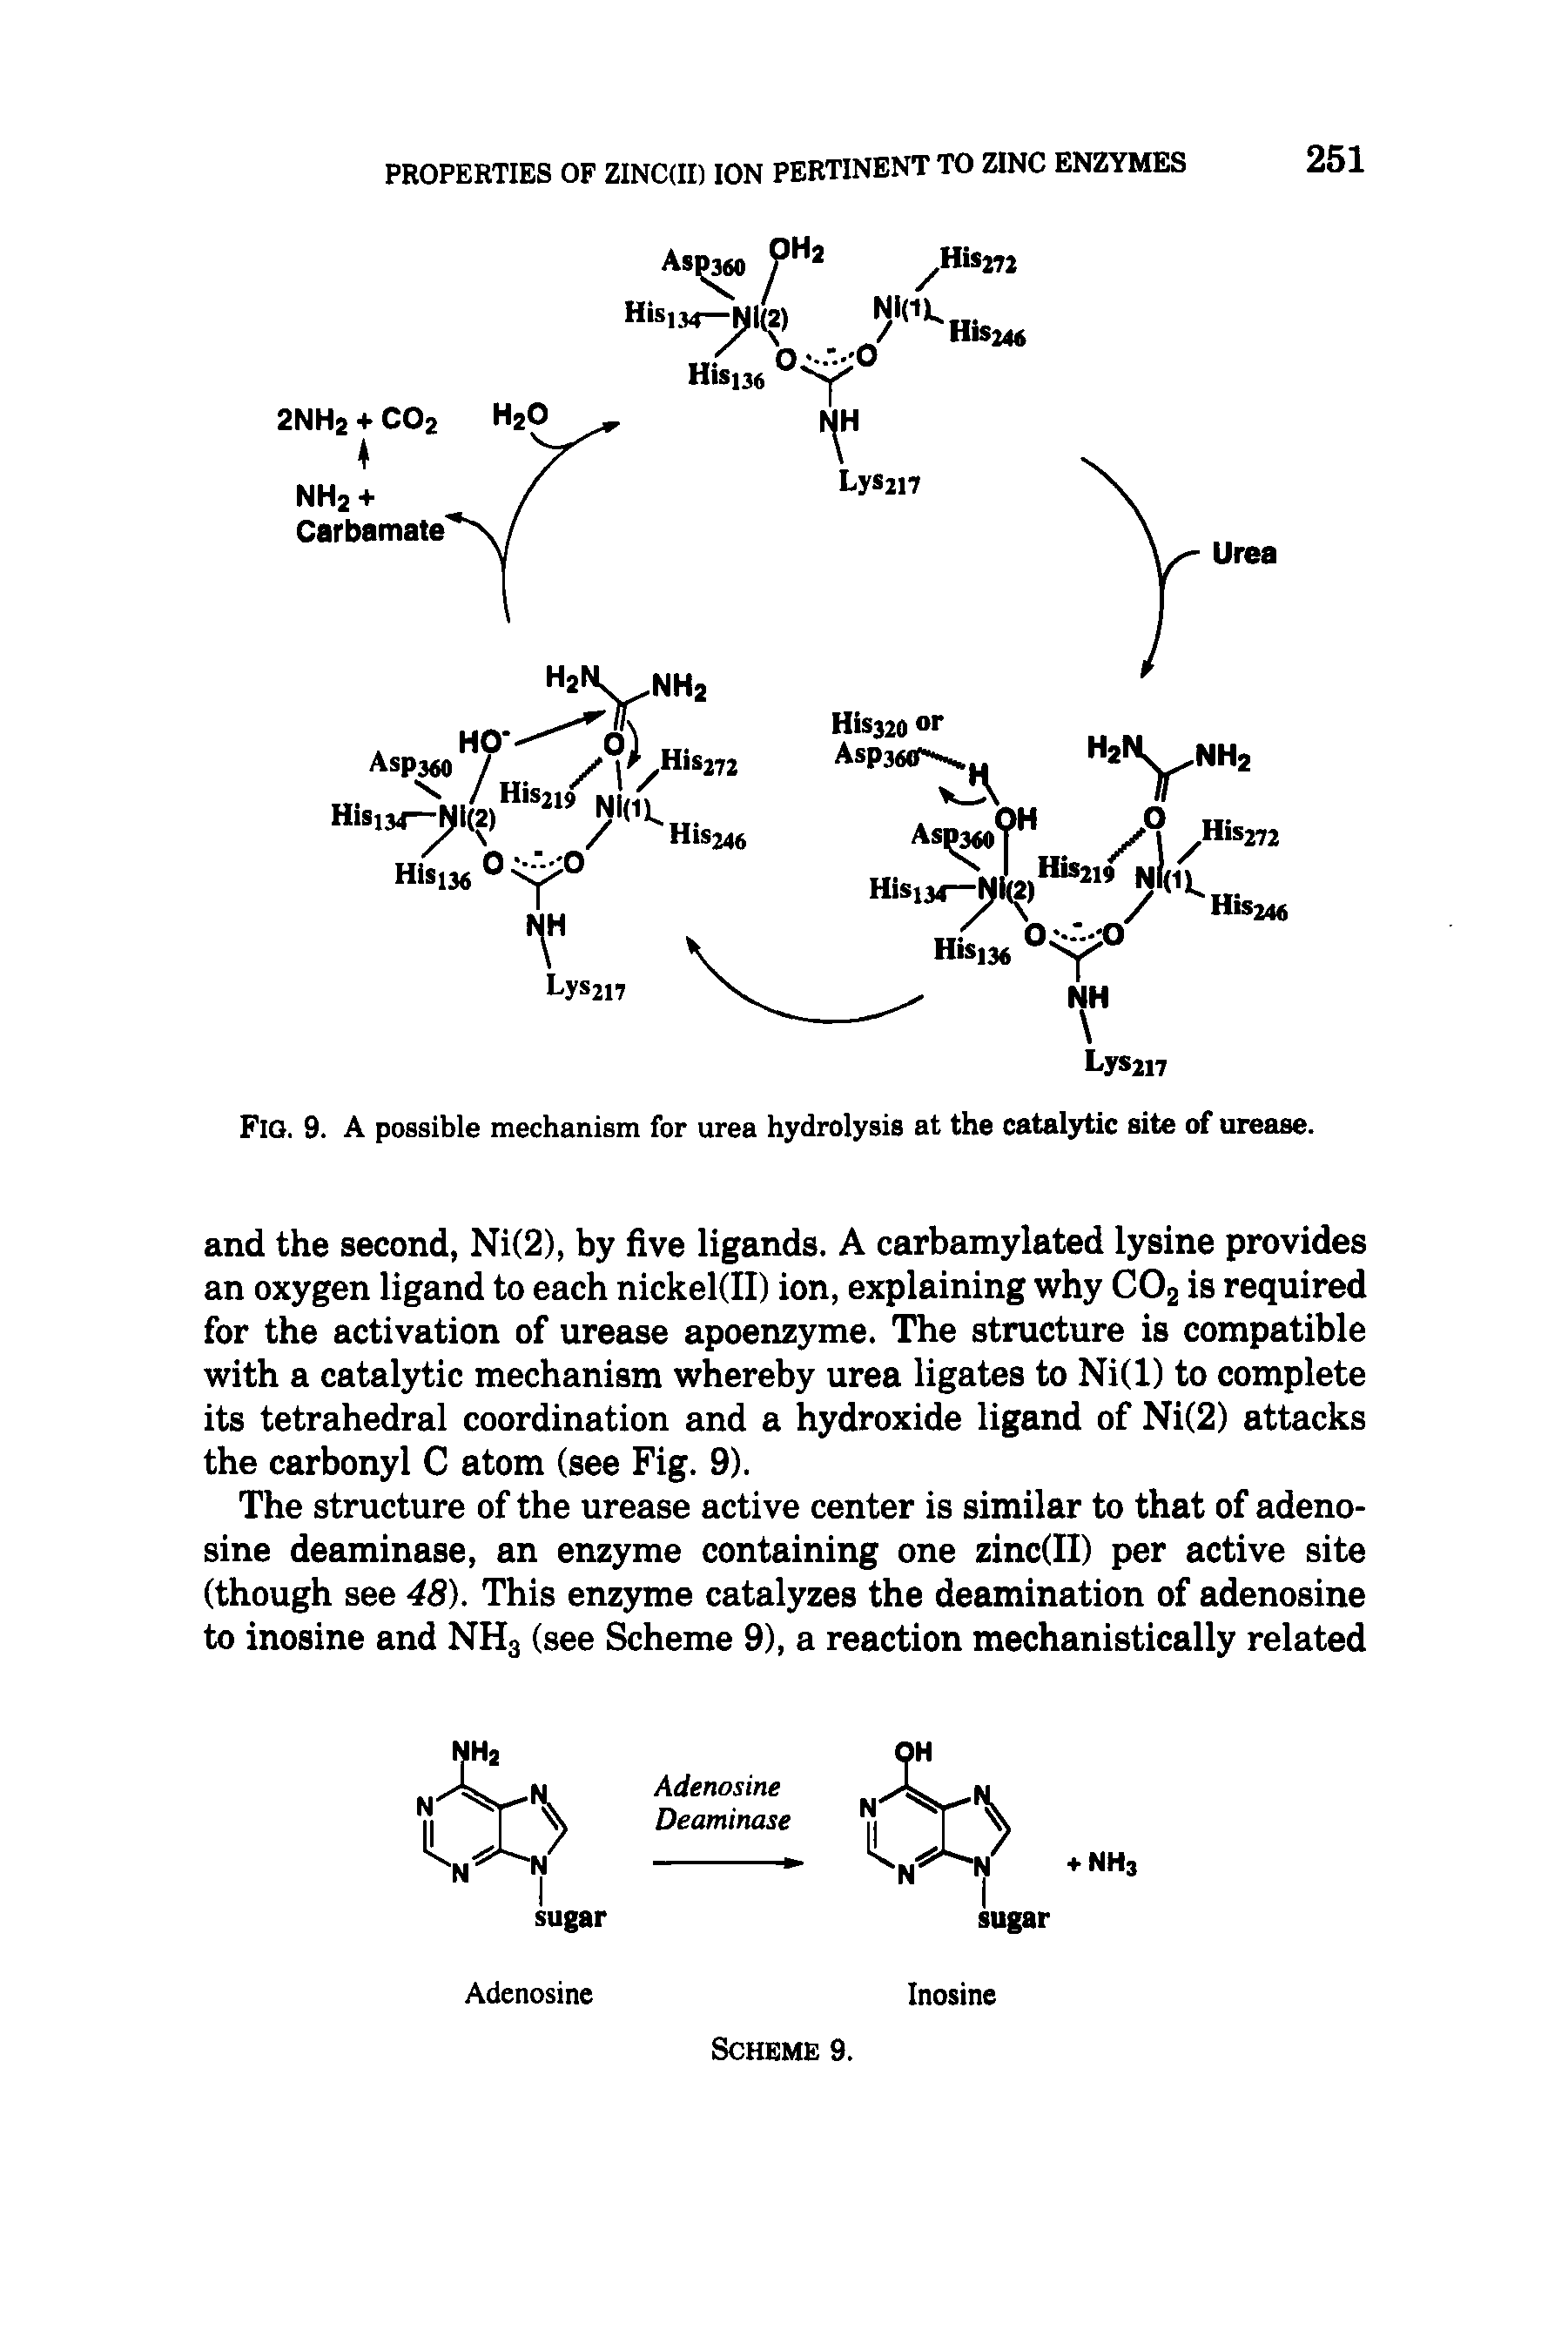 Fig. 9. A possible mechanism for urea hydrolysis at the catalytic site of urease.